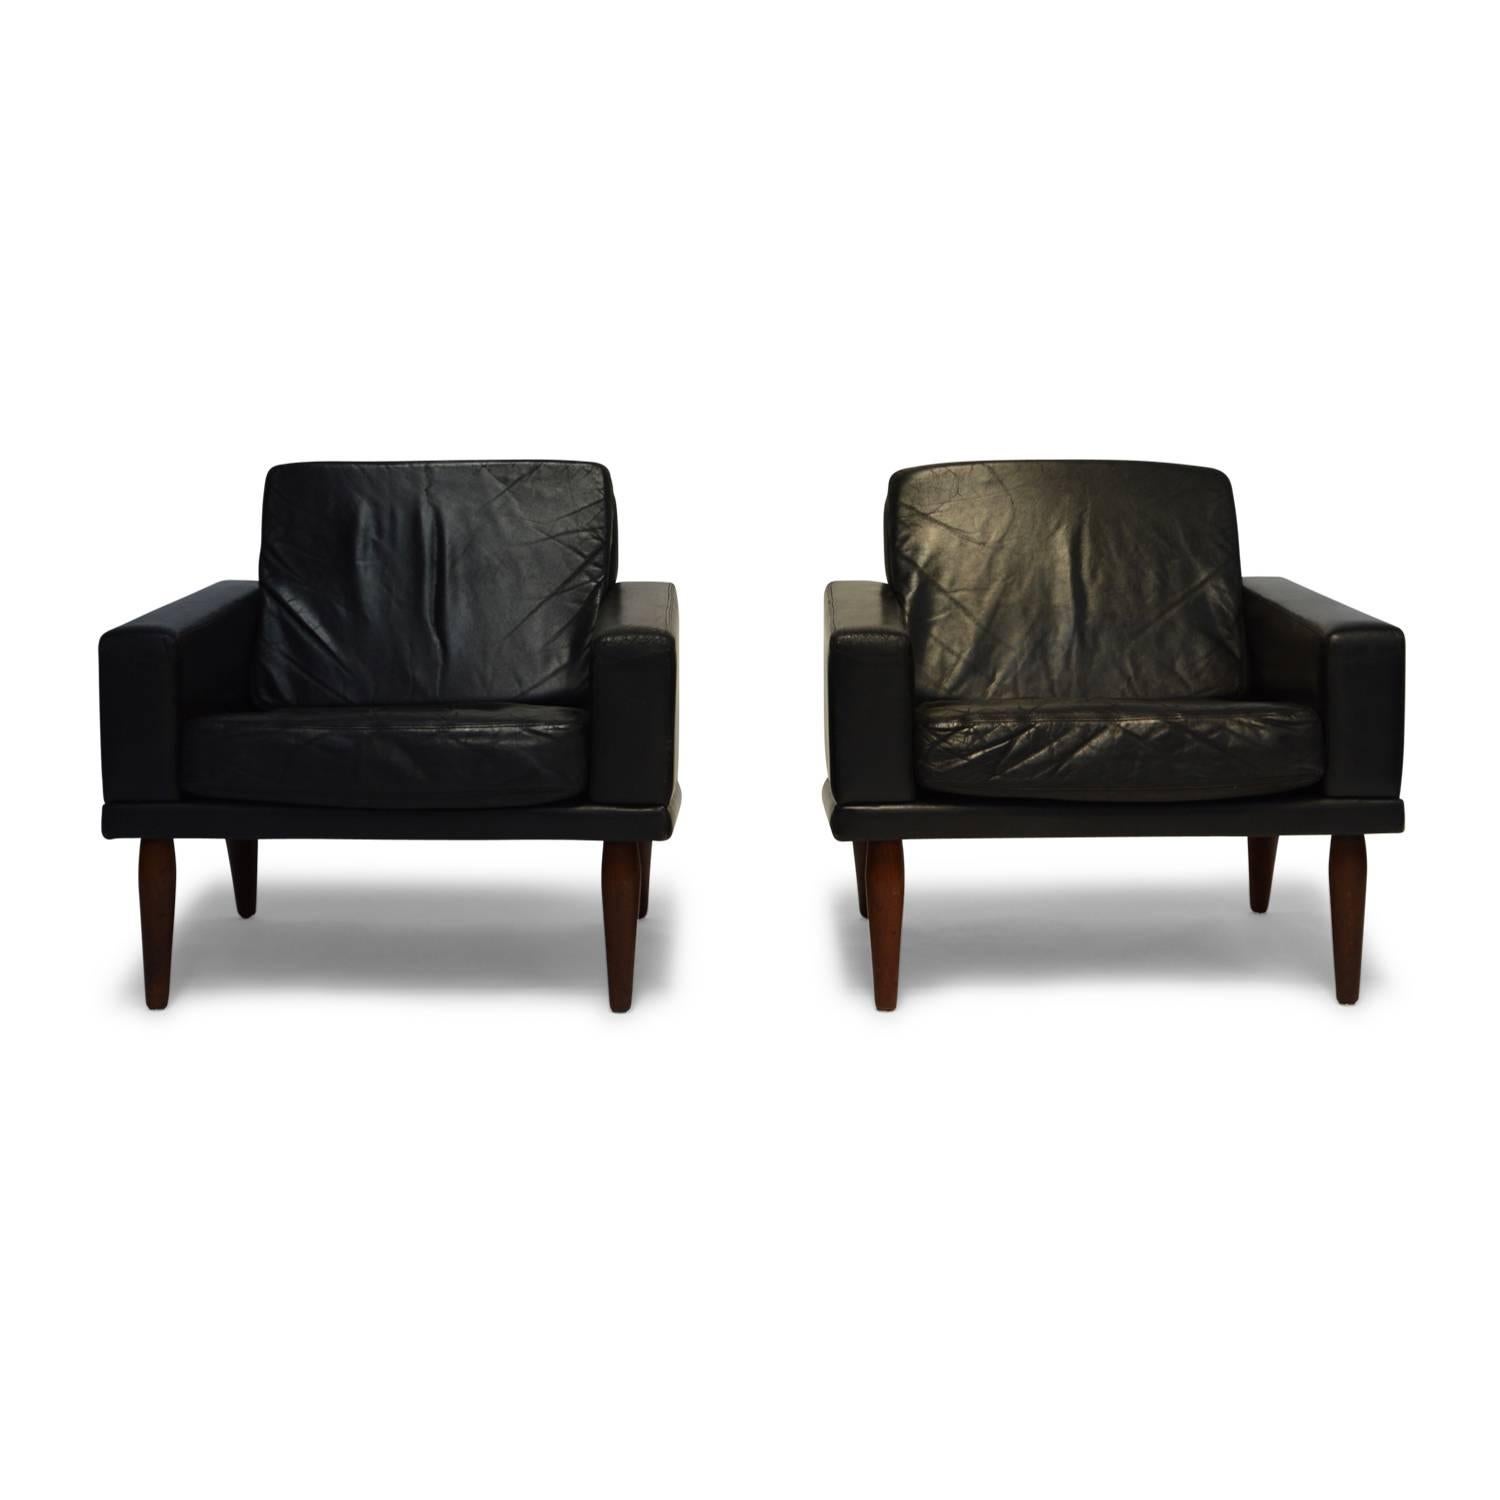 Dutch Pair of Black Leather Lounge Chairs by Bovenkamp, 1960s